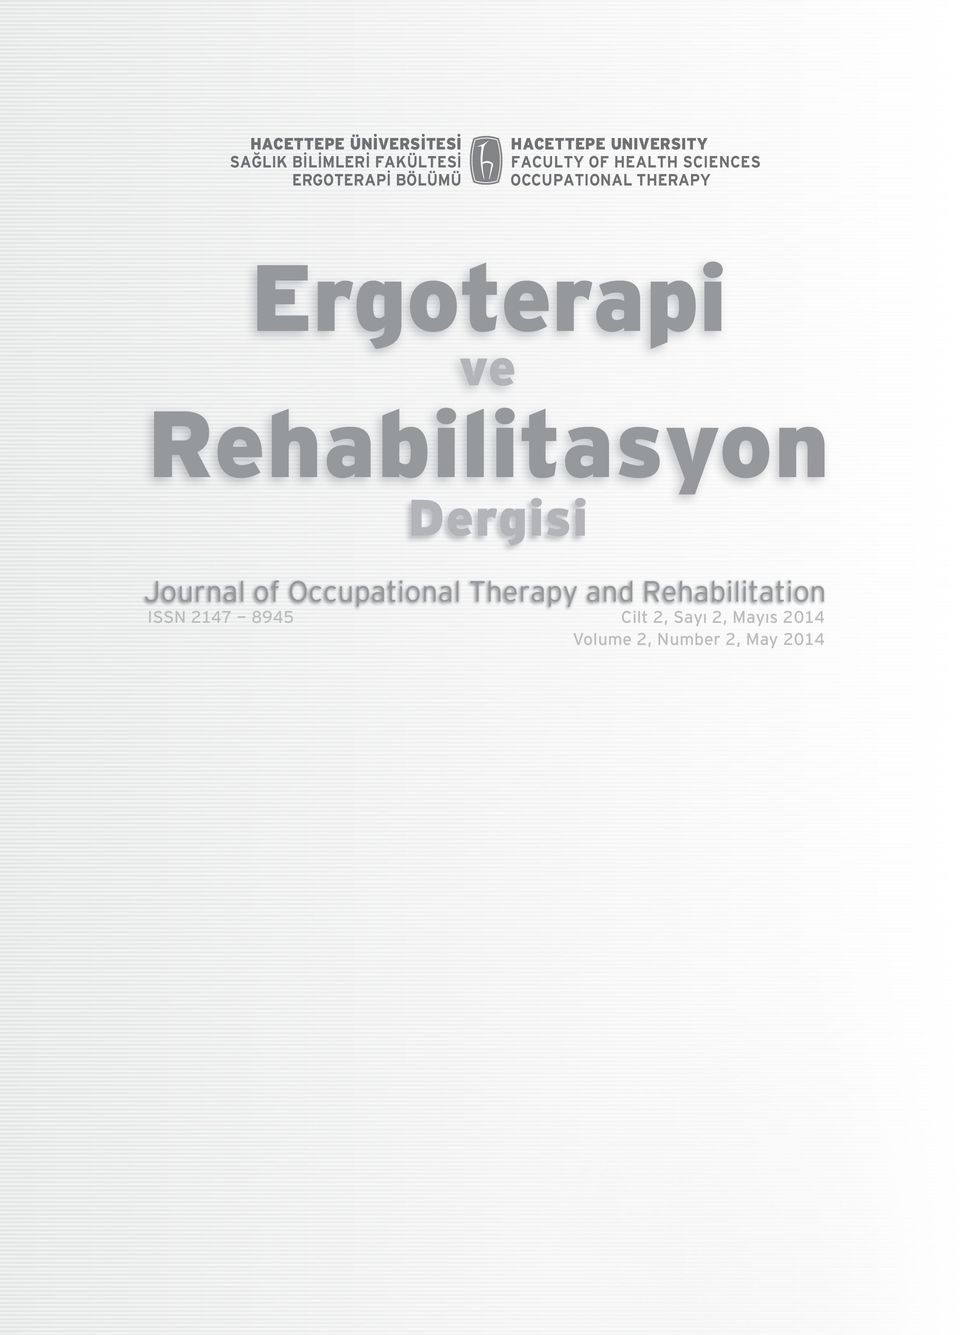 Ergoterapi ve Rehabilitasyon Dergisi Journal of Occupational Therapy and